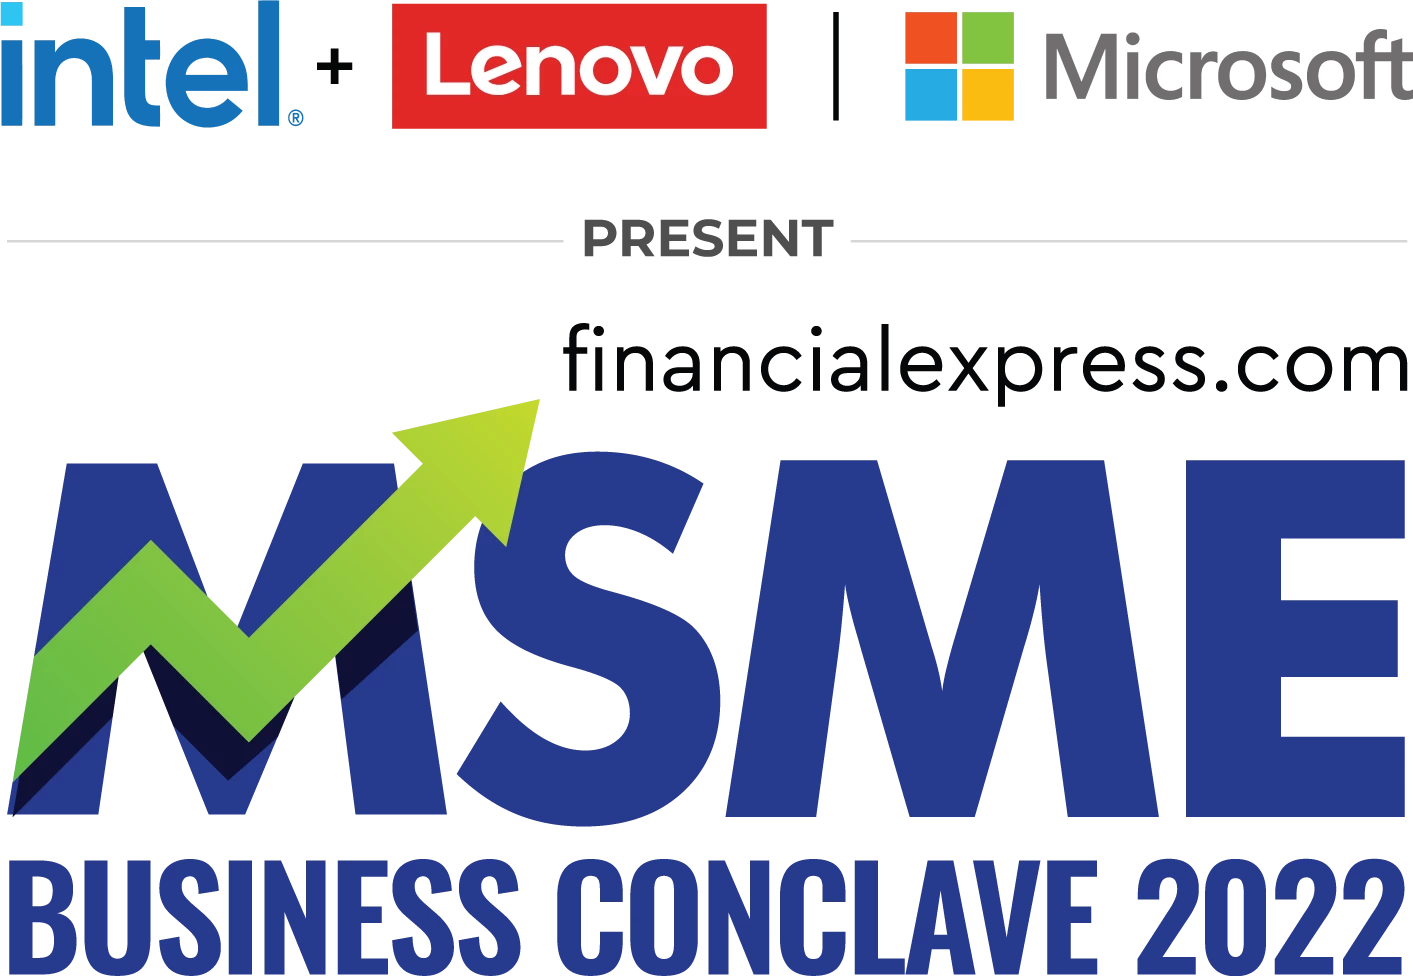 MSME Business Conclave 2022